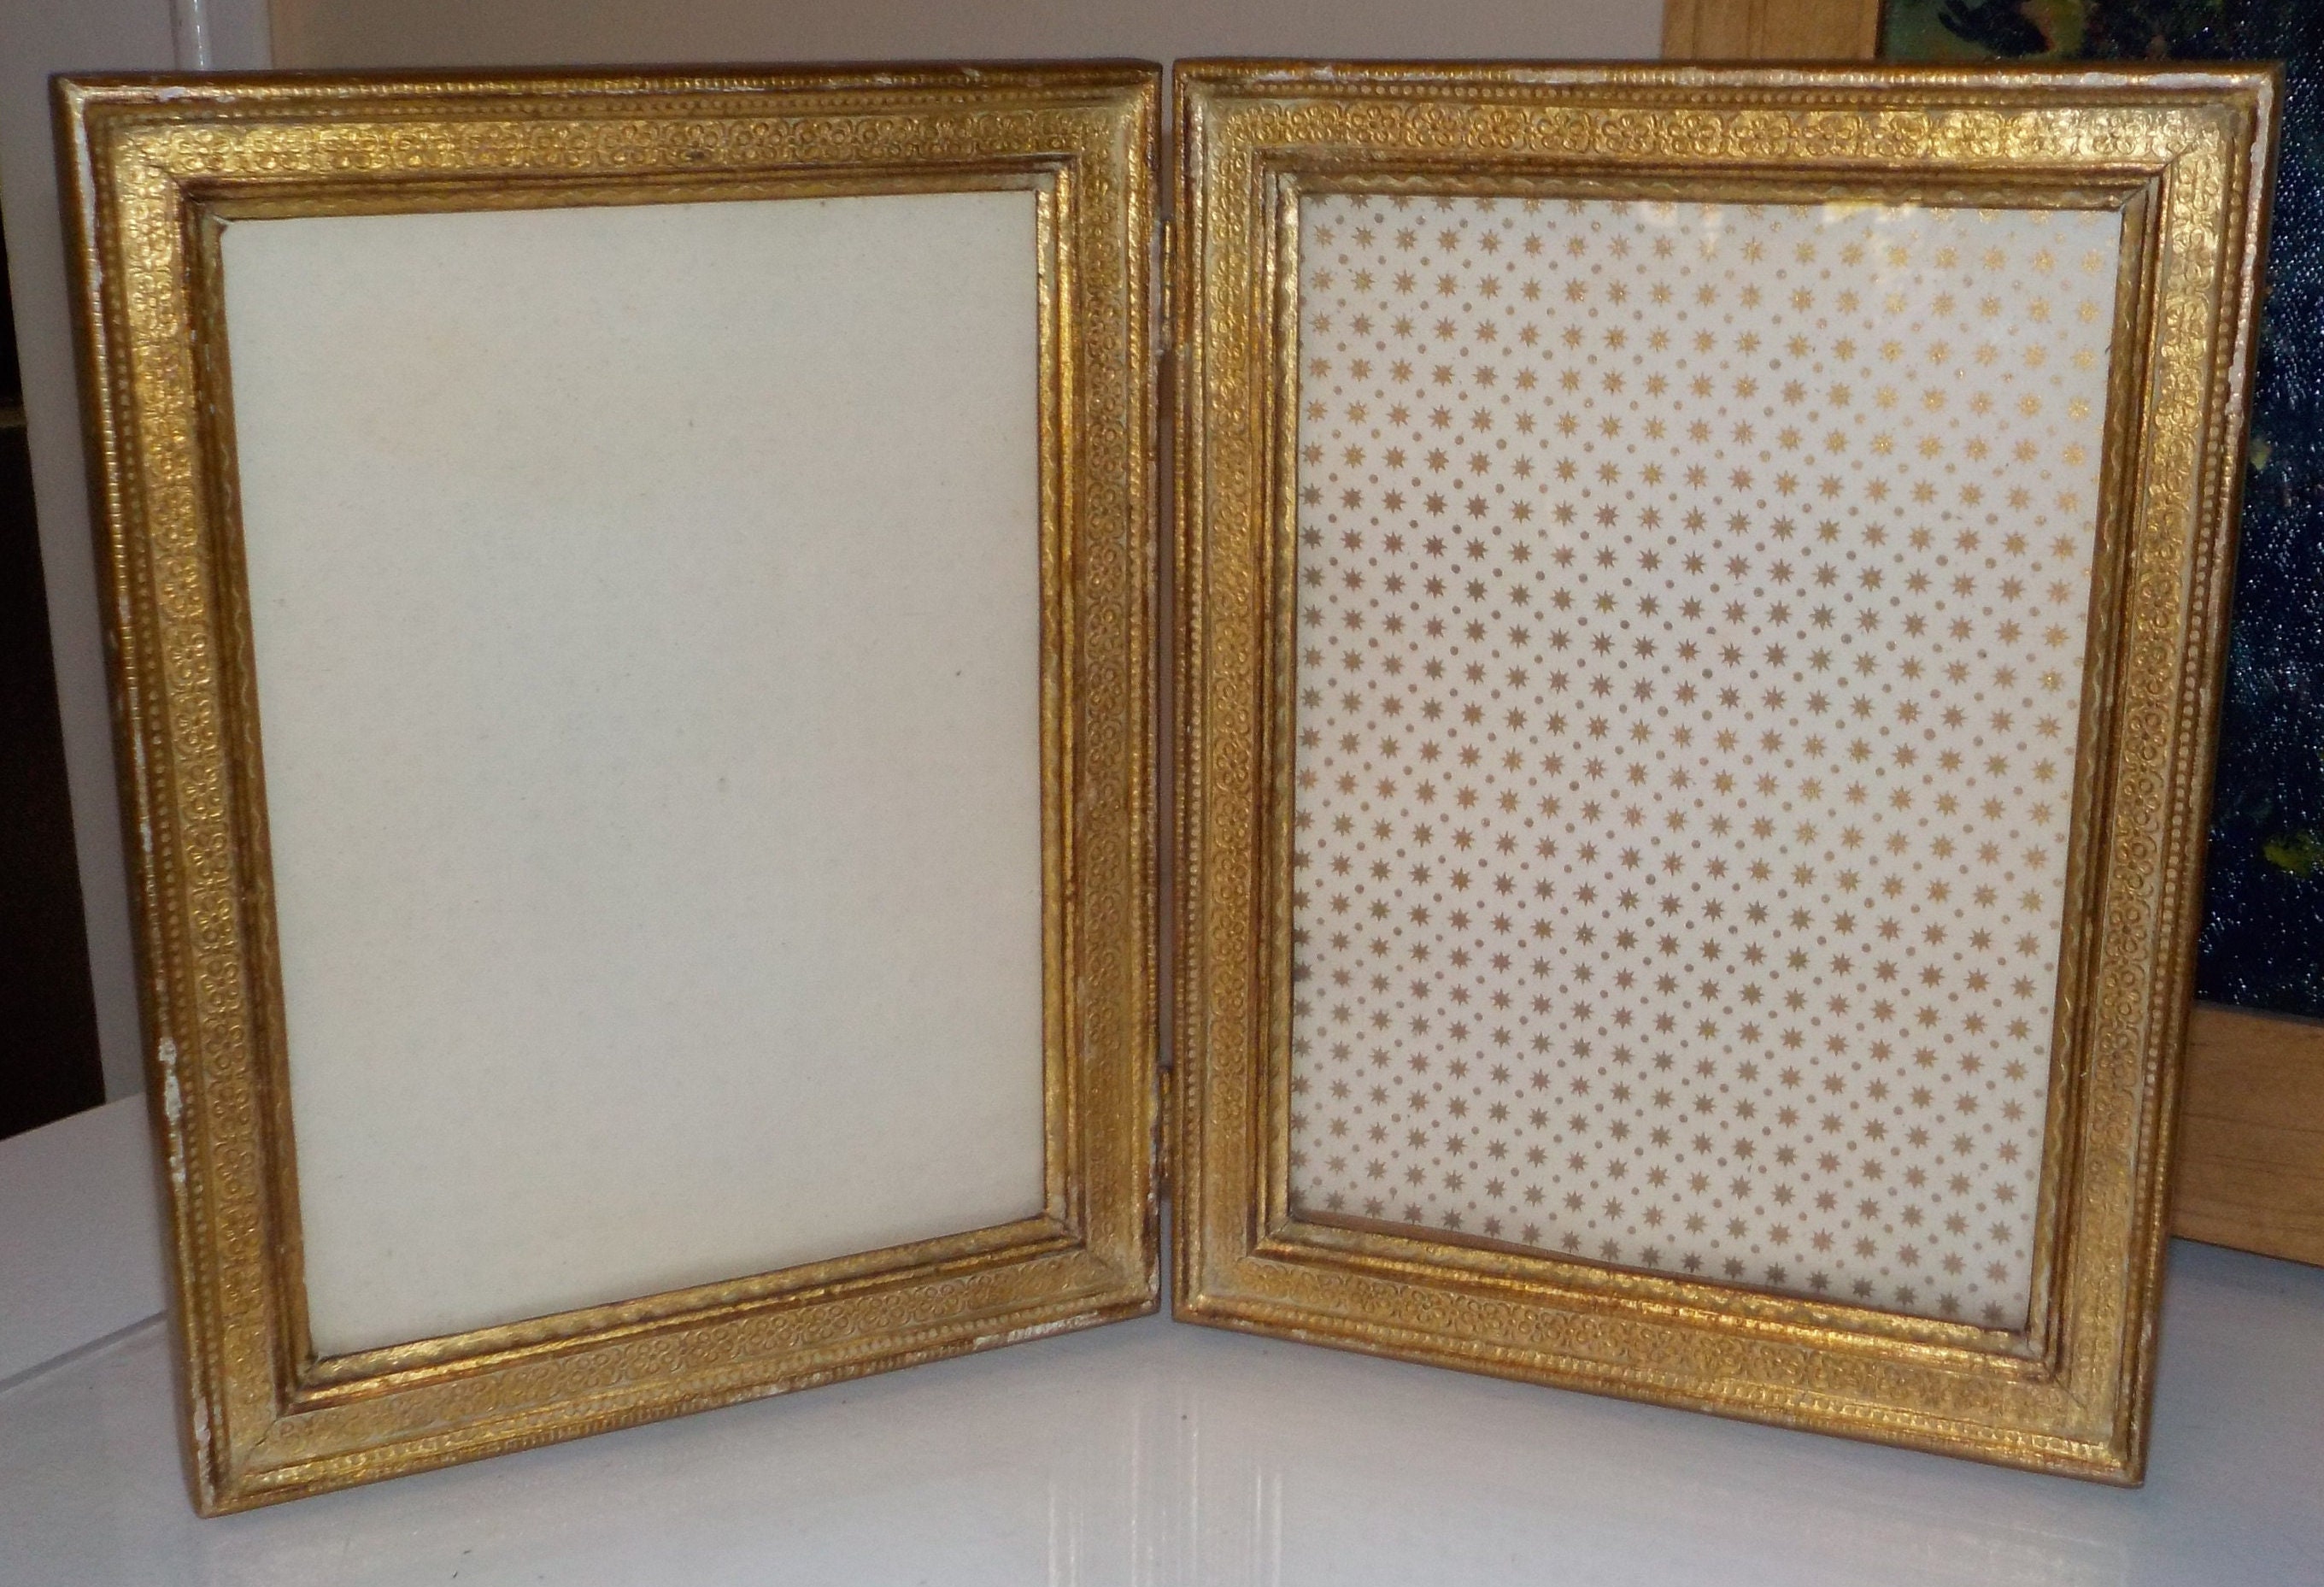 Malden Gold Floating Glass Tabletop Picture Frame 6x8/4x6